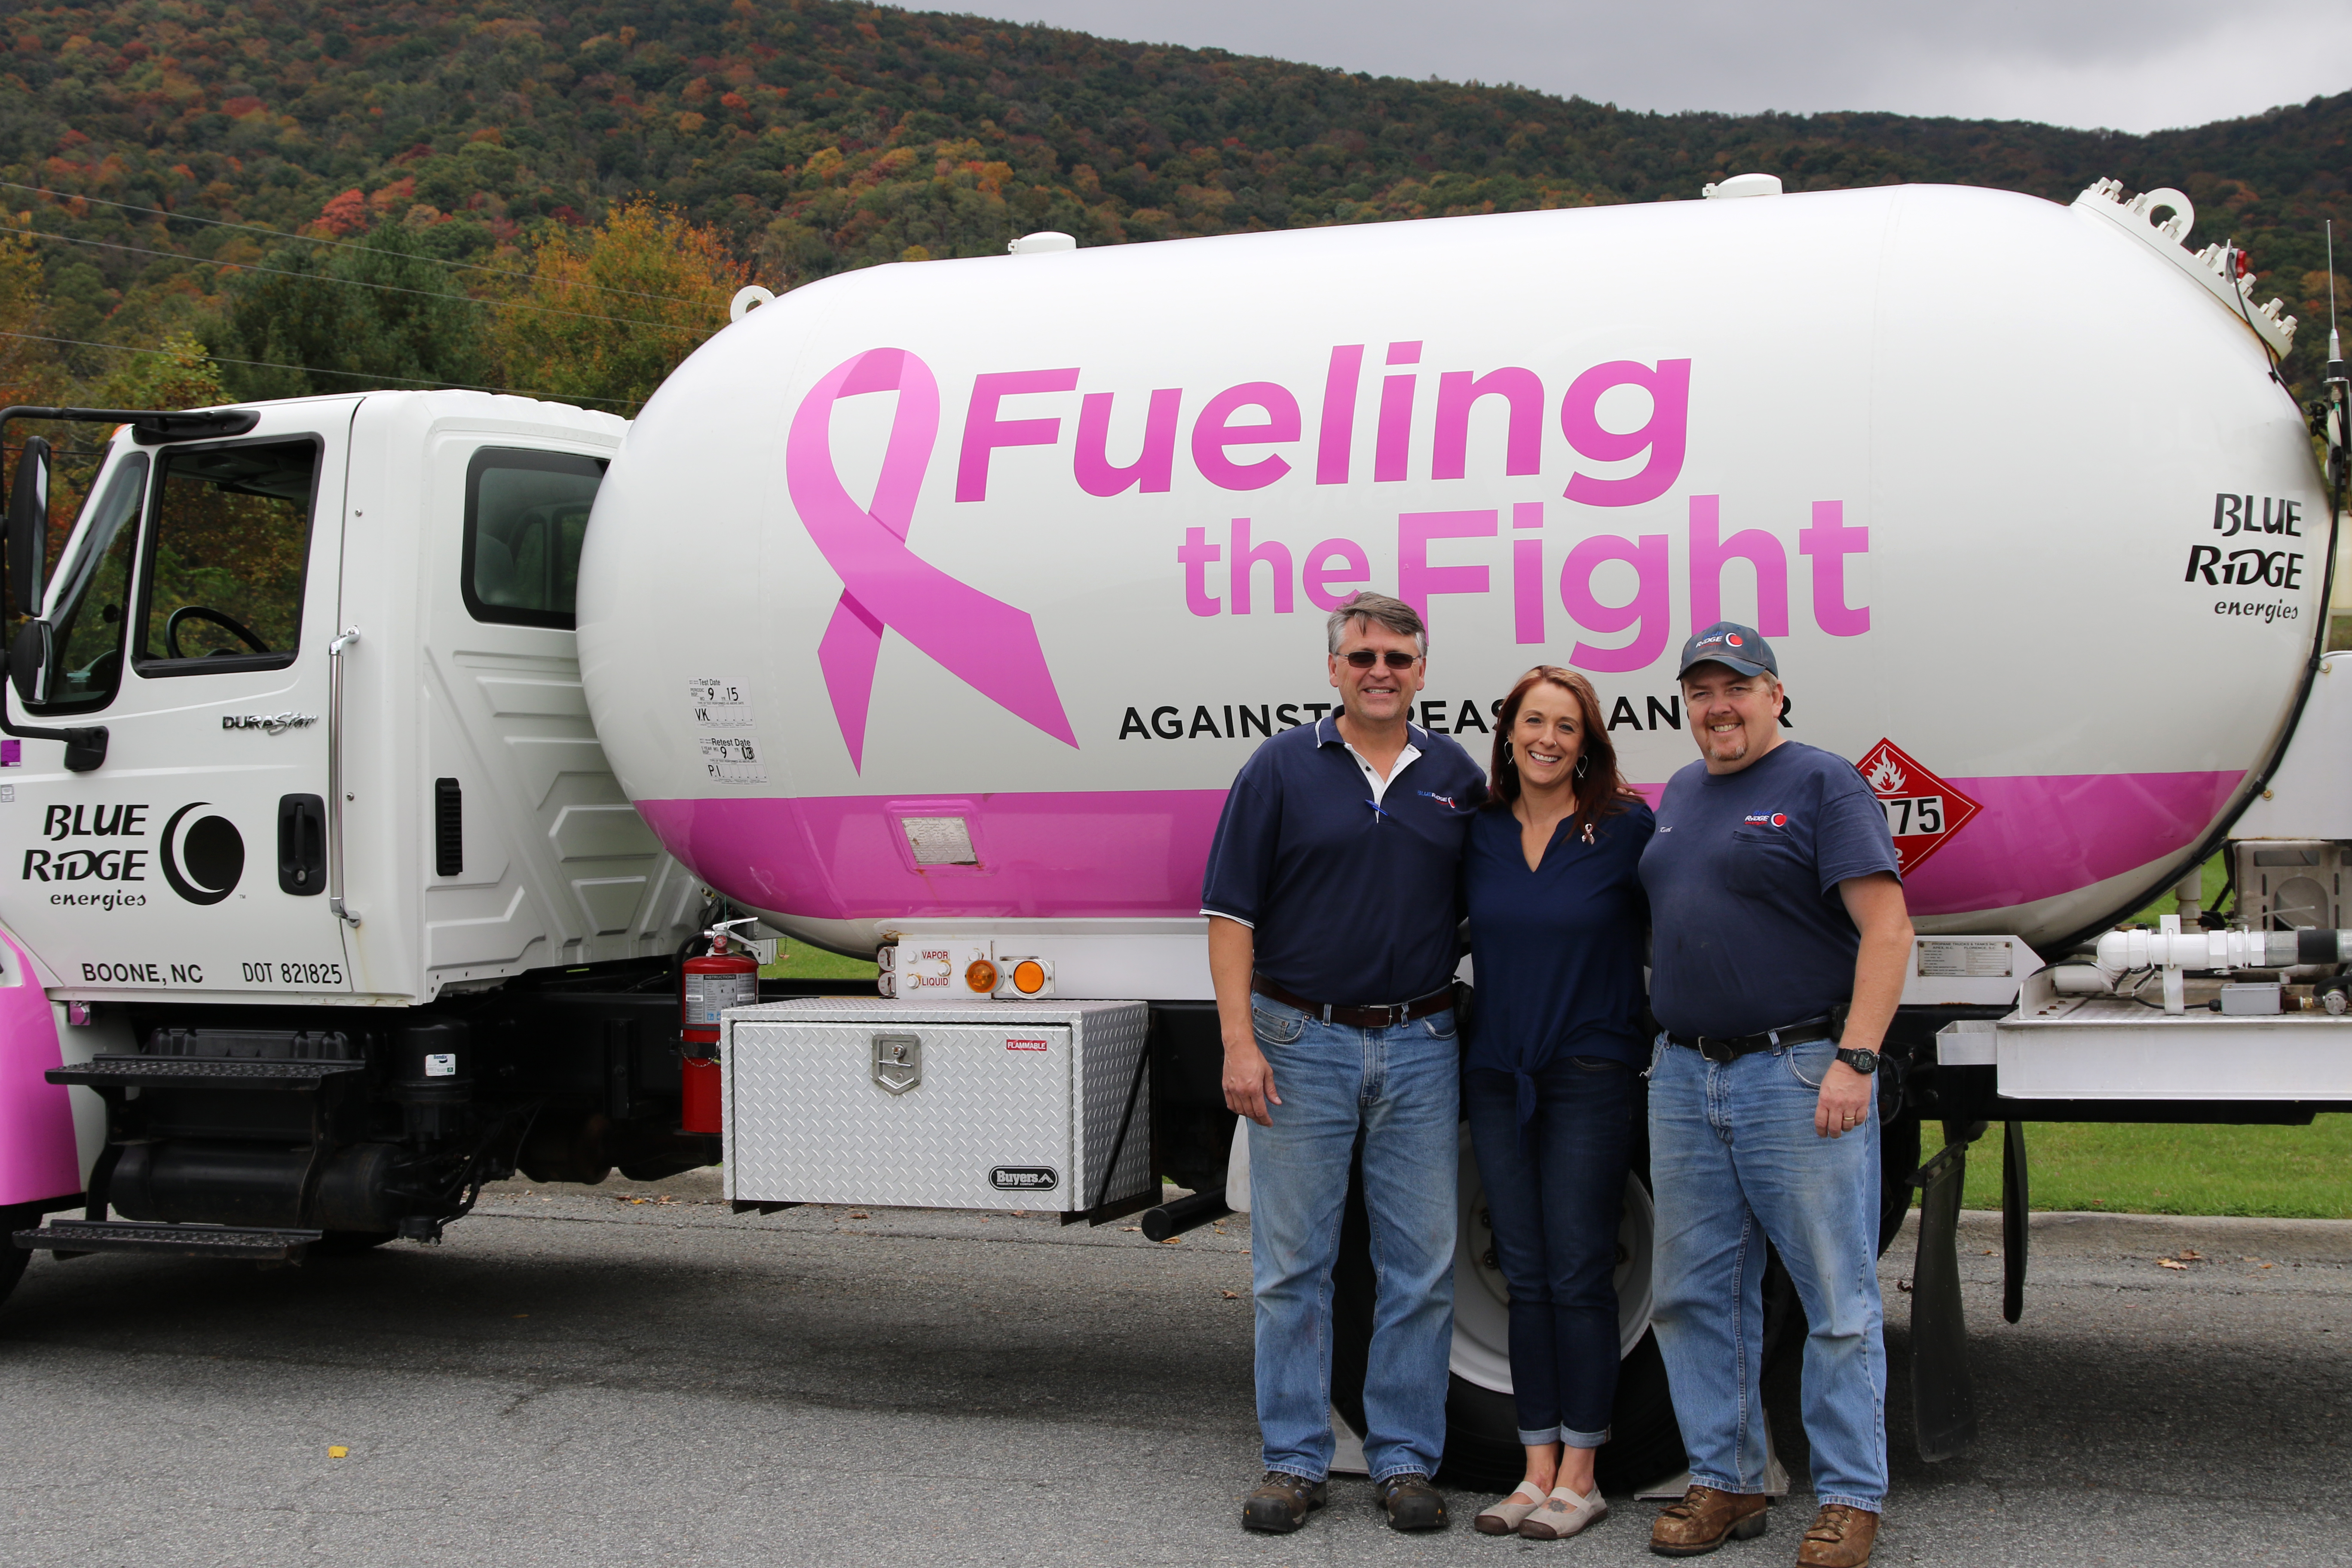 Left to Right: Amy Michael, Kevin Ward, Watauga/Avery District Manager for Blue Ridge Energies and Keith Smith, sales and delivery for Blue Ridge Energies. Amy Michael and Blue Ridge Energies are teaming up during October, which is national breast cancer awareness month. Blue Ridge Energies is donating to cancer support organizations across its service area by giving a penny per every gallon delivered over the past year from its four “Fueling the Fight” propane delivery trucks. Amy, a breast cancer survivor, is Social Worker for Watauga County Schools, Cove Creek and Valle Crucis Schools.